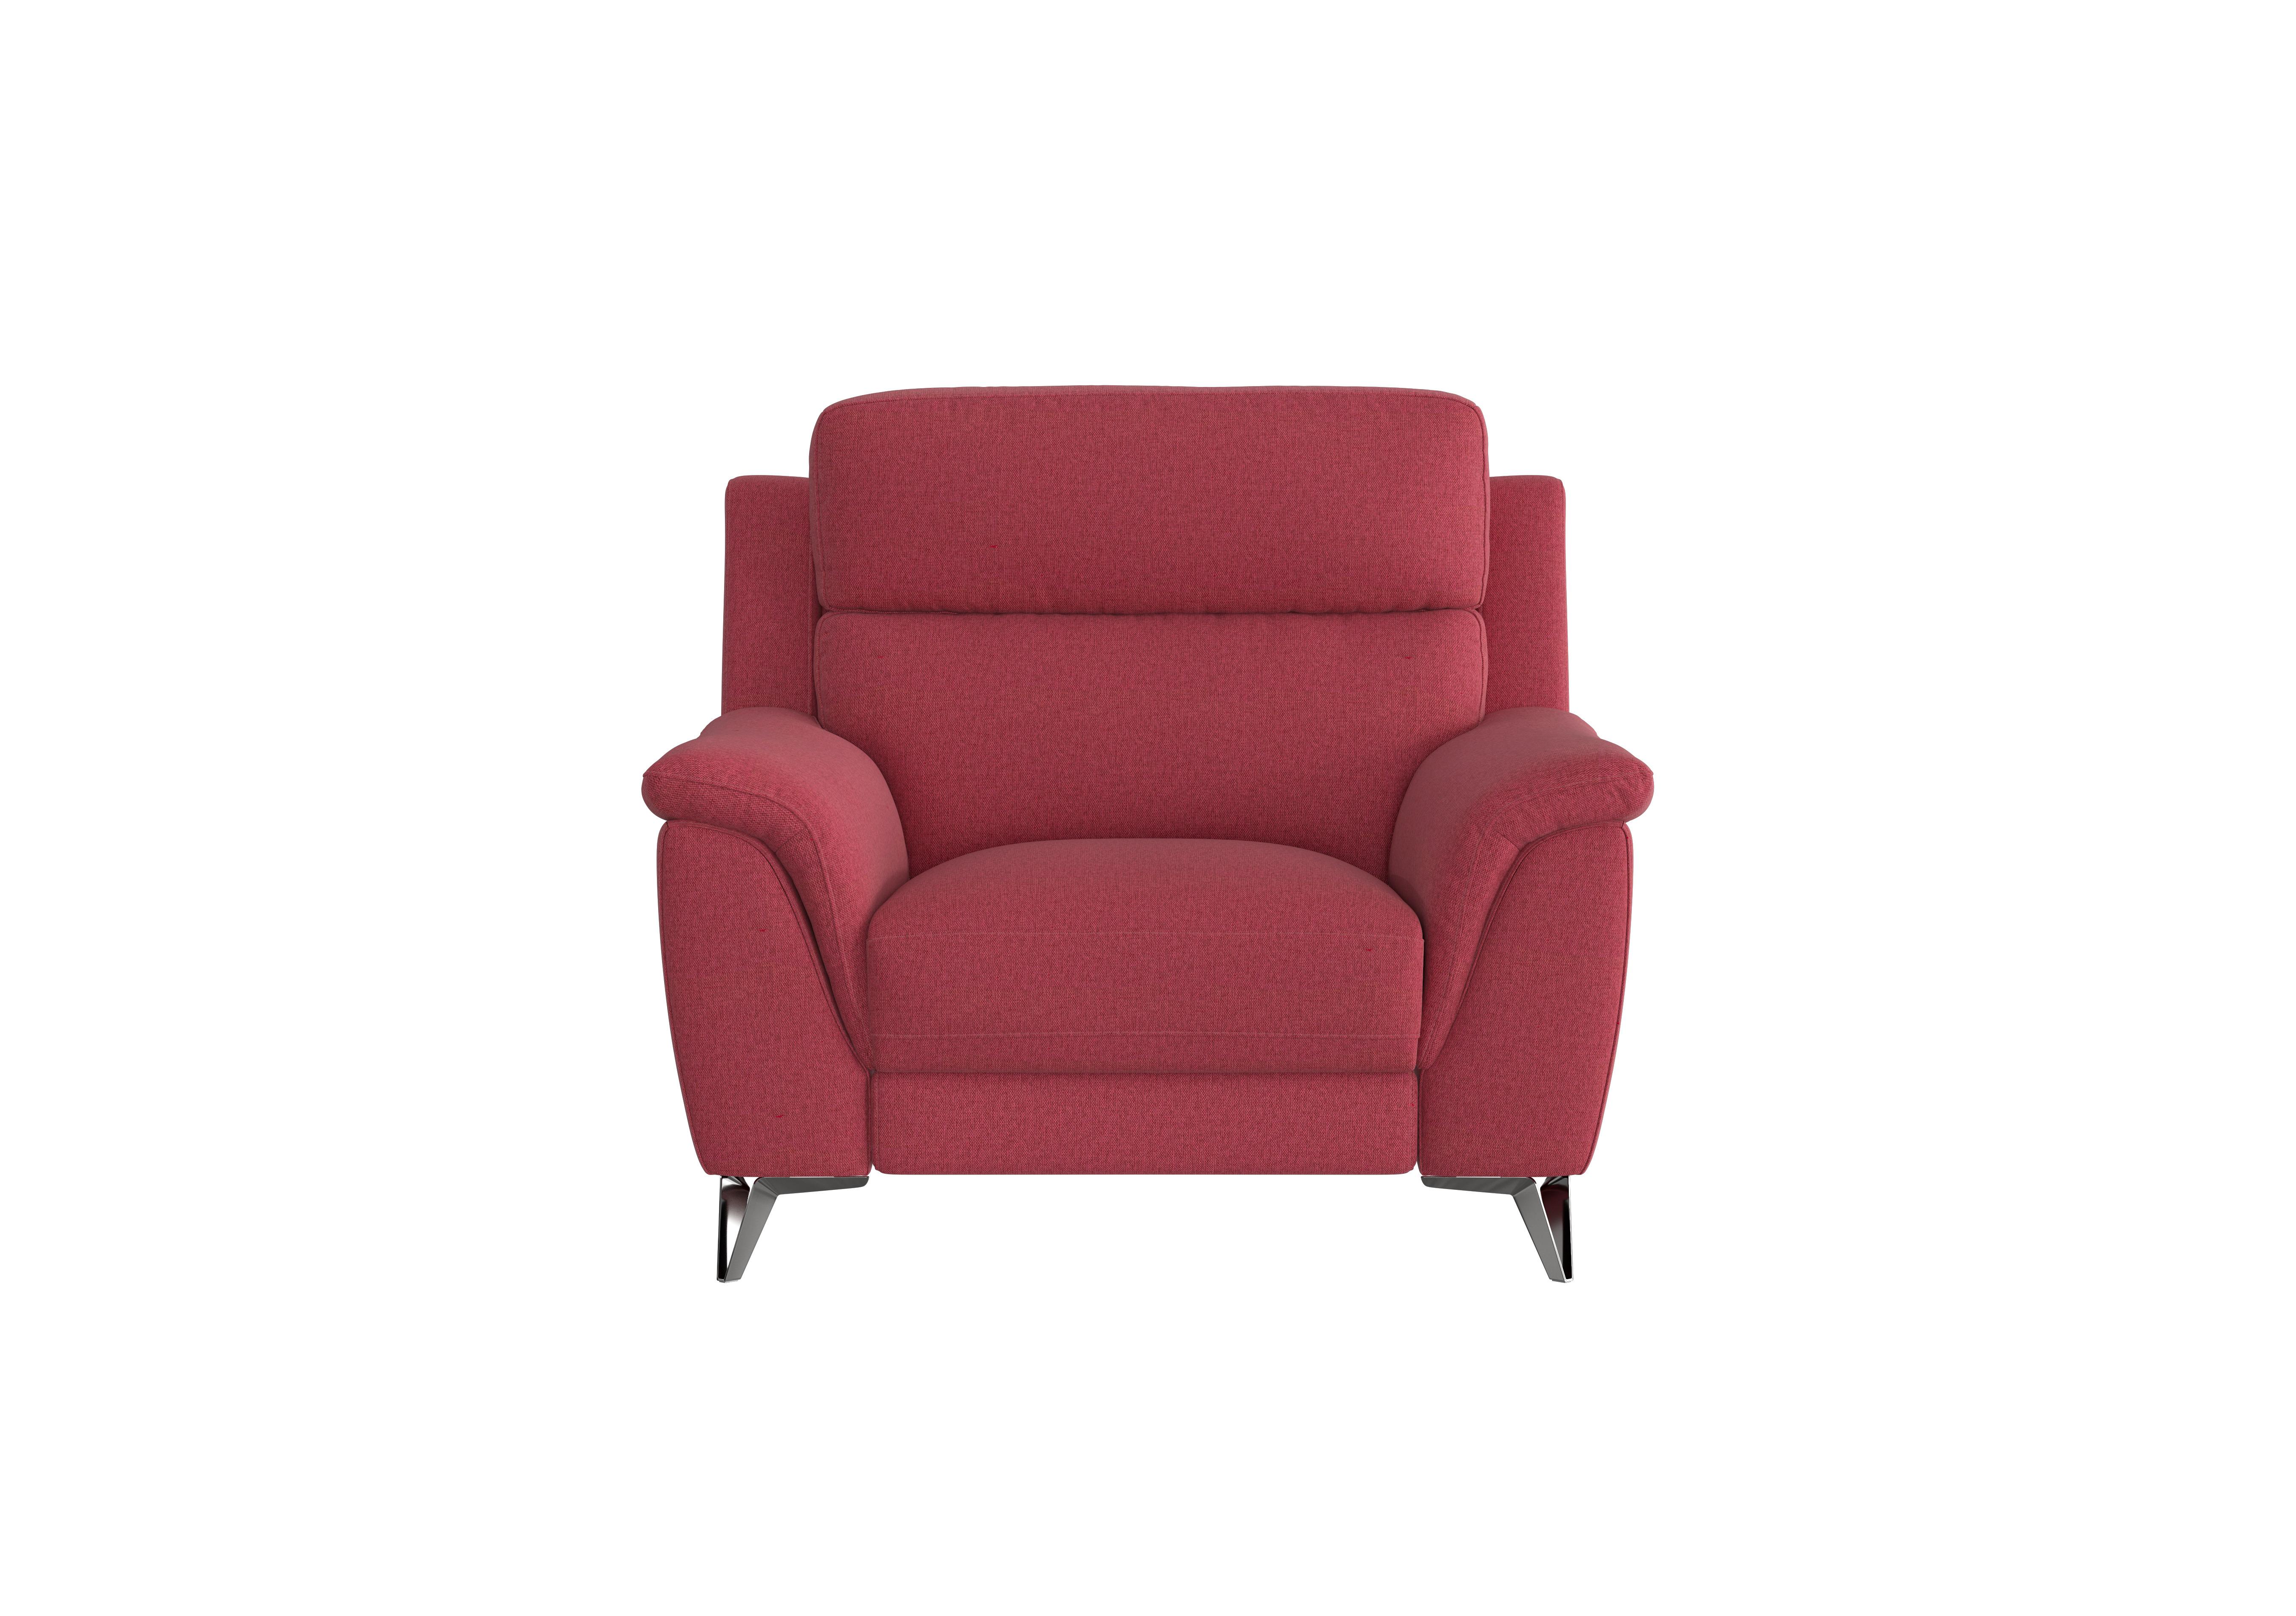 Contempo Fabric Armchair in Fab-Blt-R29 Red on Furniture Village